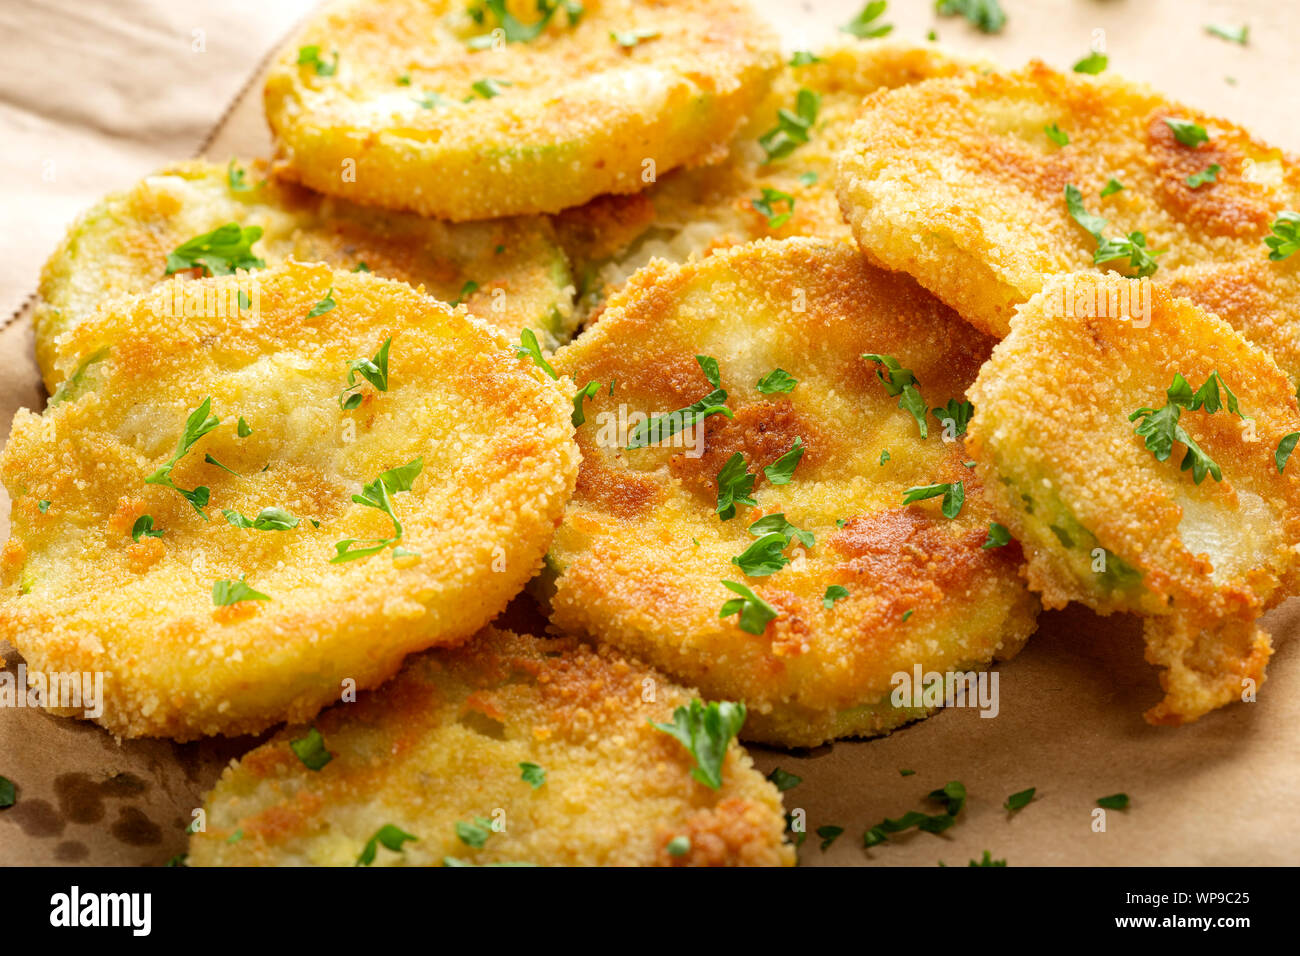 Fried slices of zucchini with green chopped parsley on paper Stock Photo